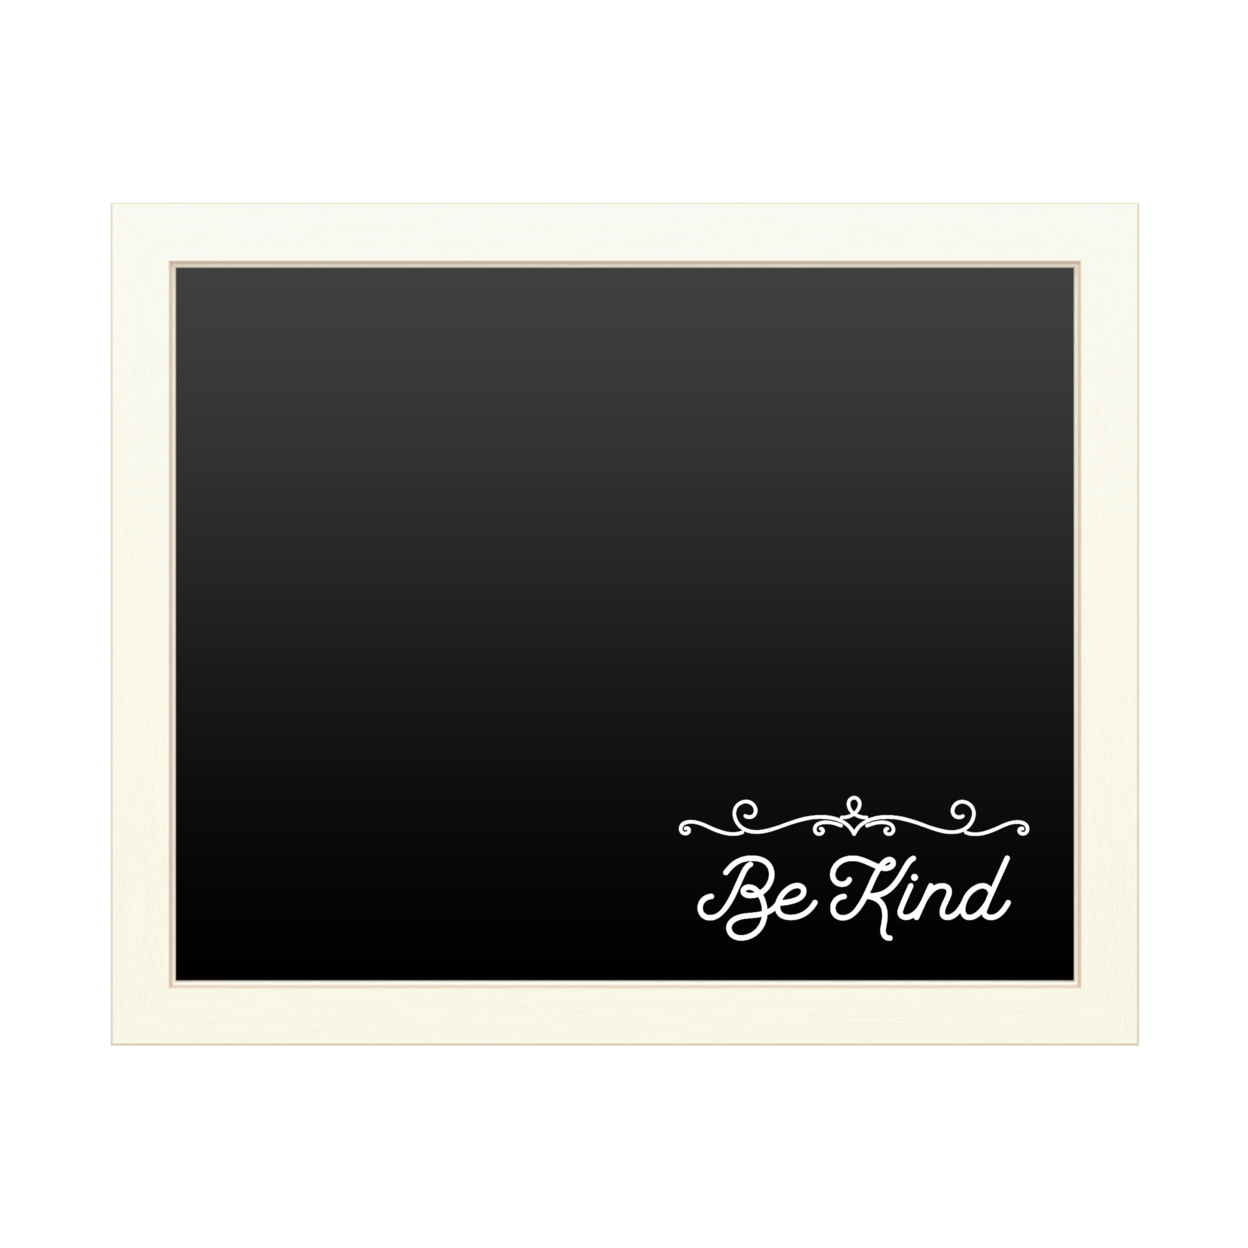 16 X 20 Chalk Board With Printed Artwork - Be Kind Script White Board - Ready To Hang Chalkboard